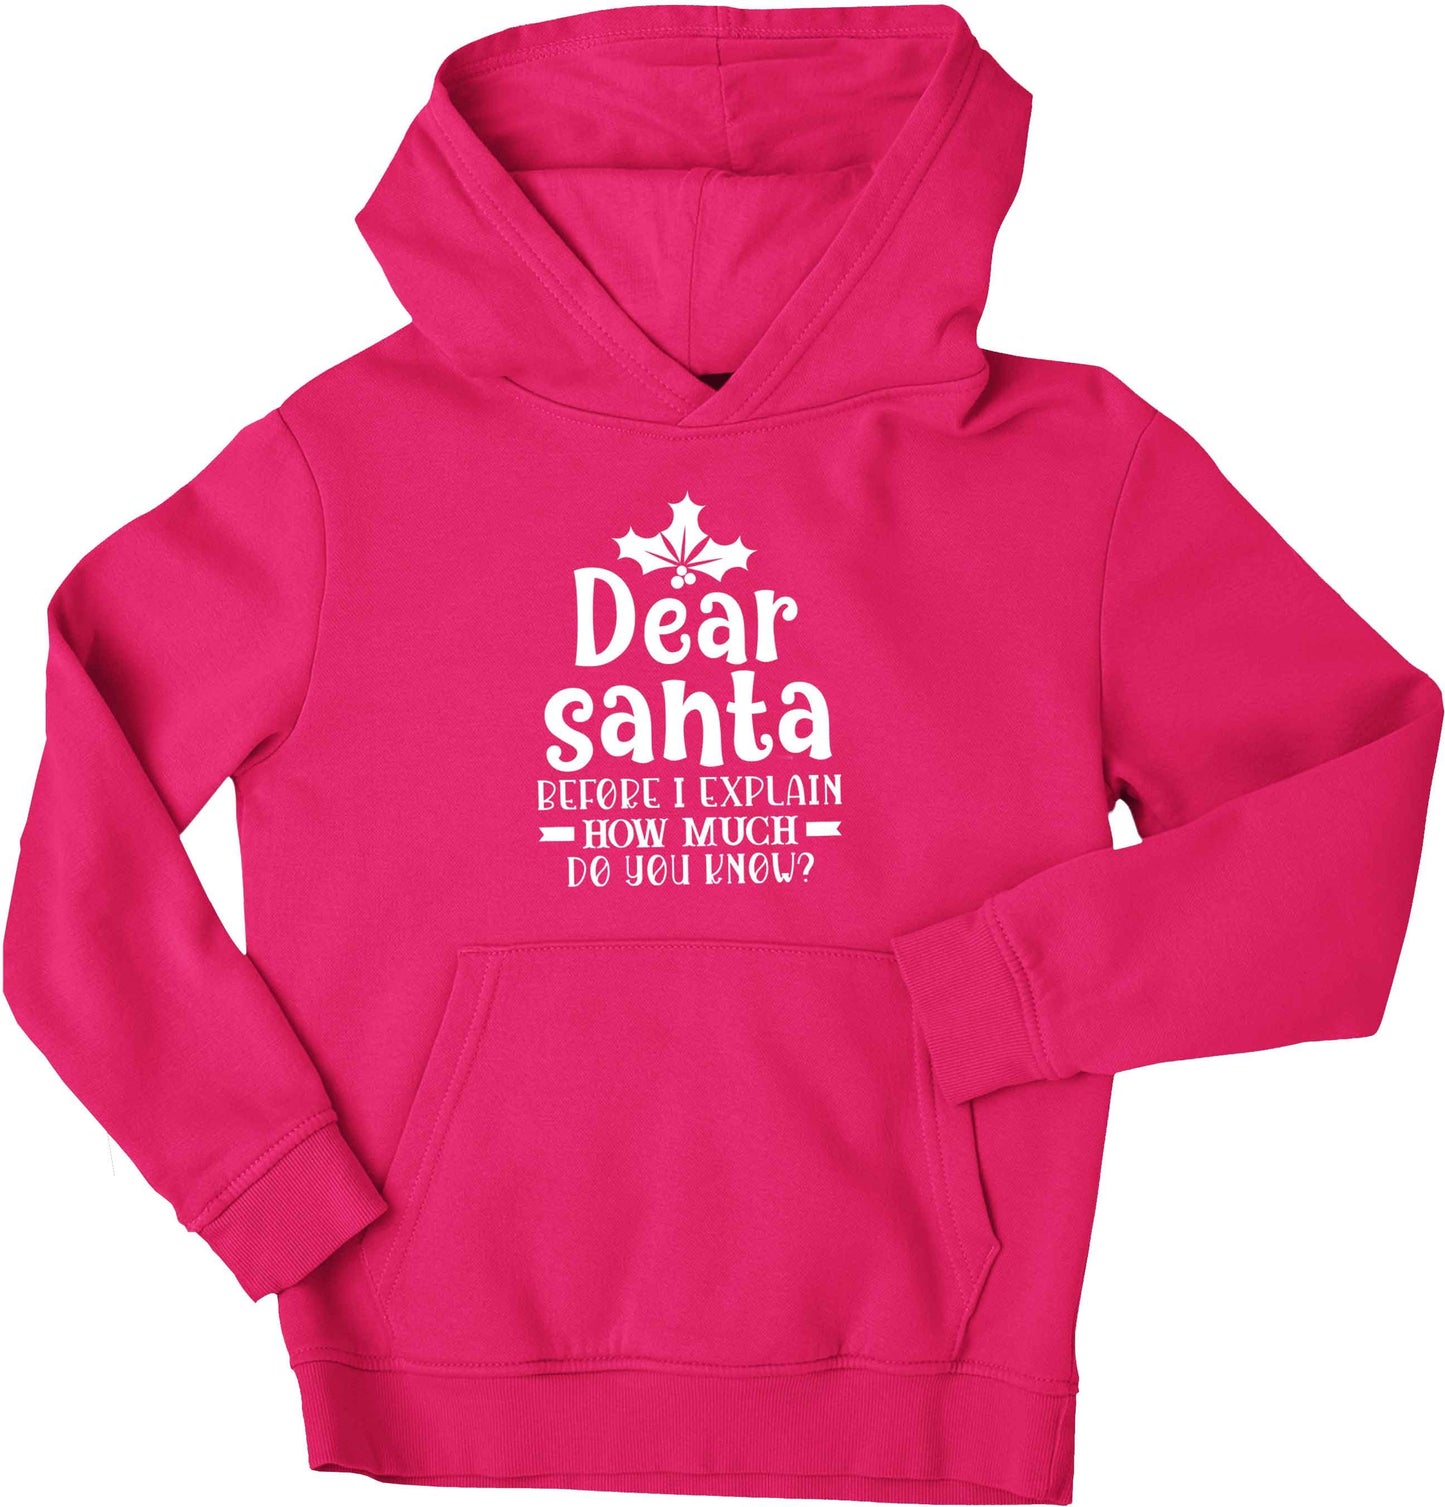 Santa before I explain how much do you know? children's pink hoodie 12-13 Years